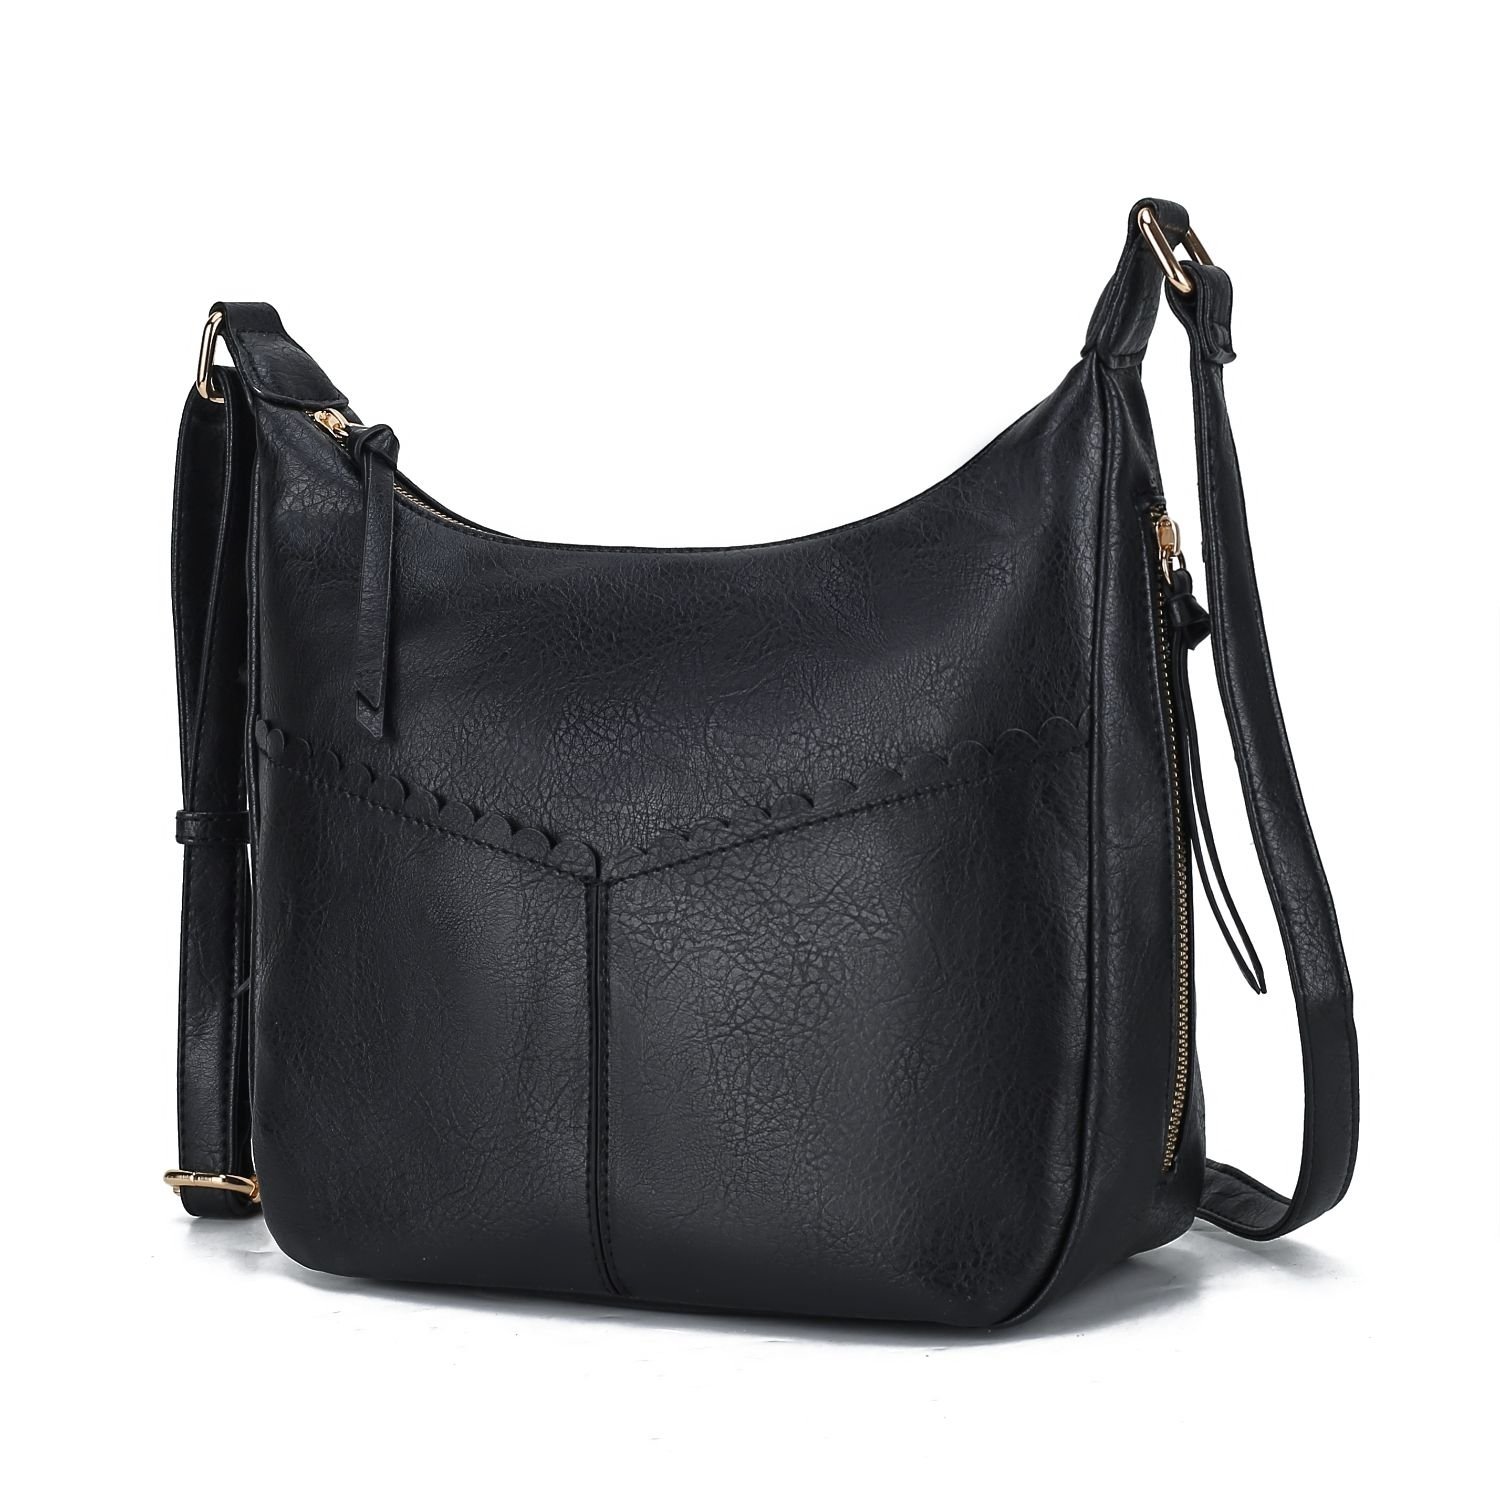 MKF Collection Valencia Vegan Leather Women's Shoulder Bag By Mia K - Brown